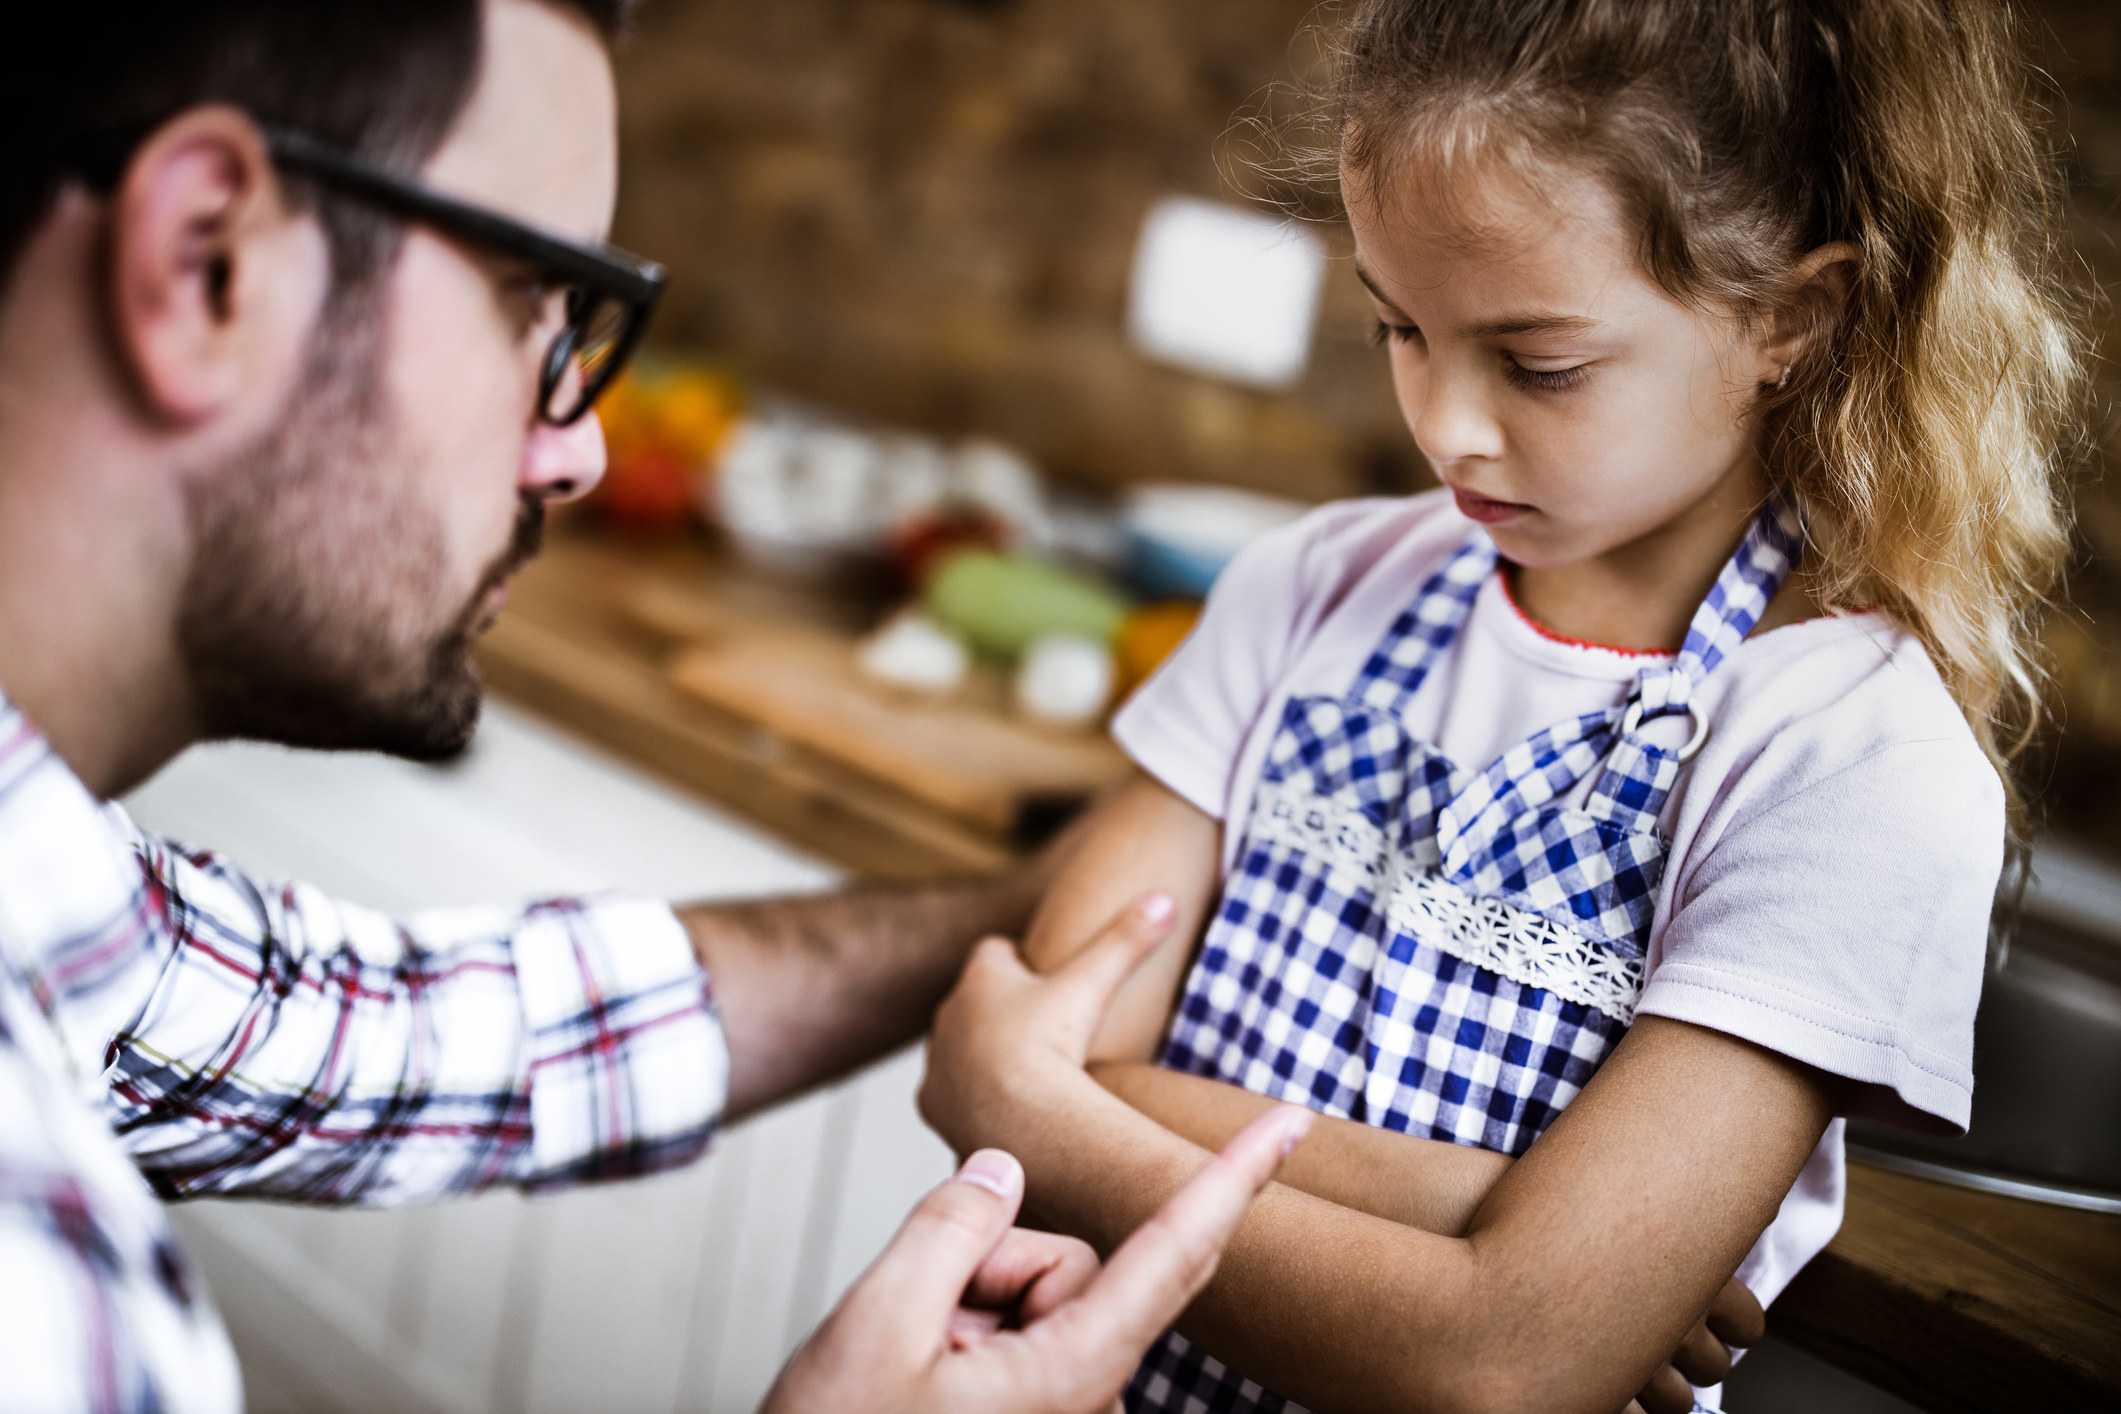 A stock image of a man scolding a child